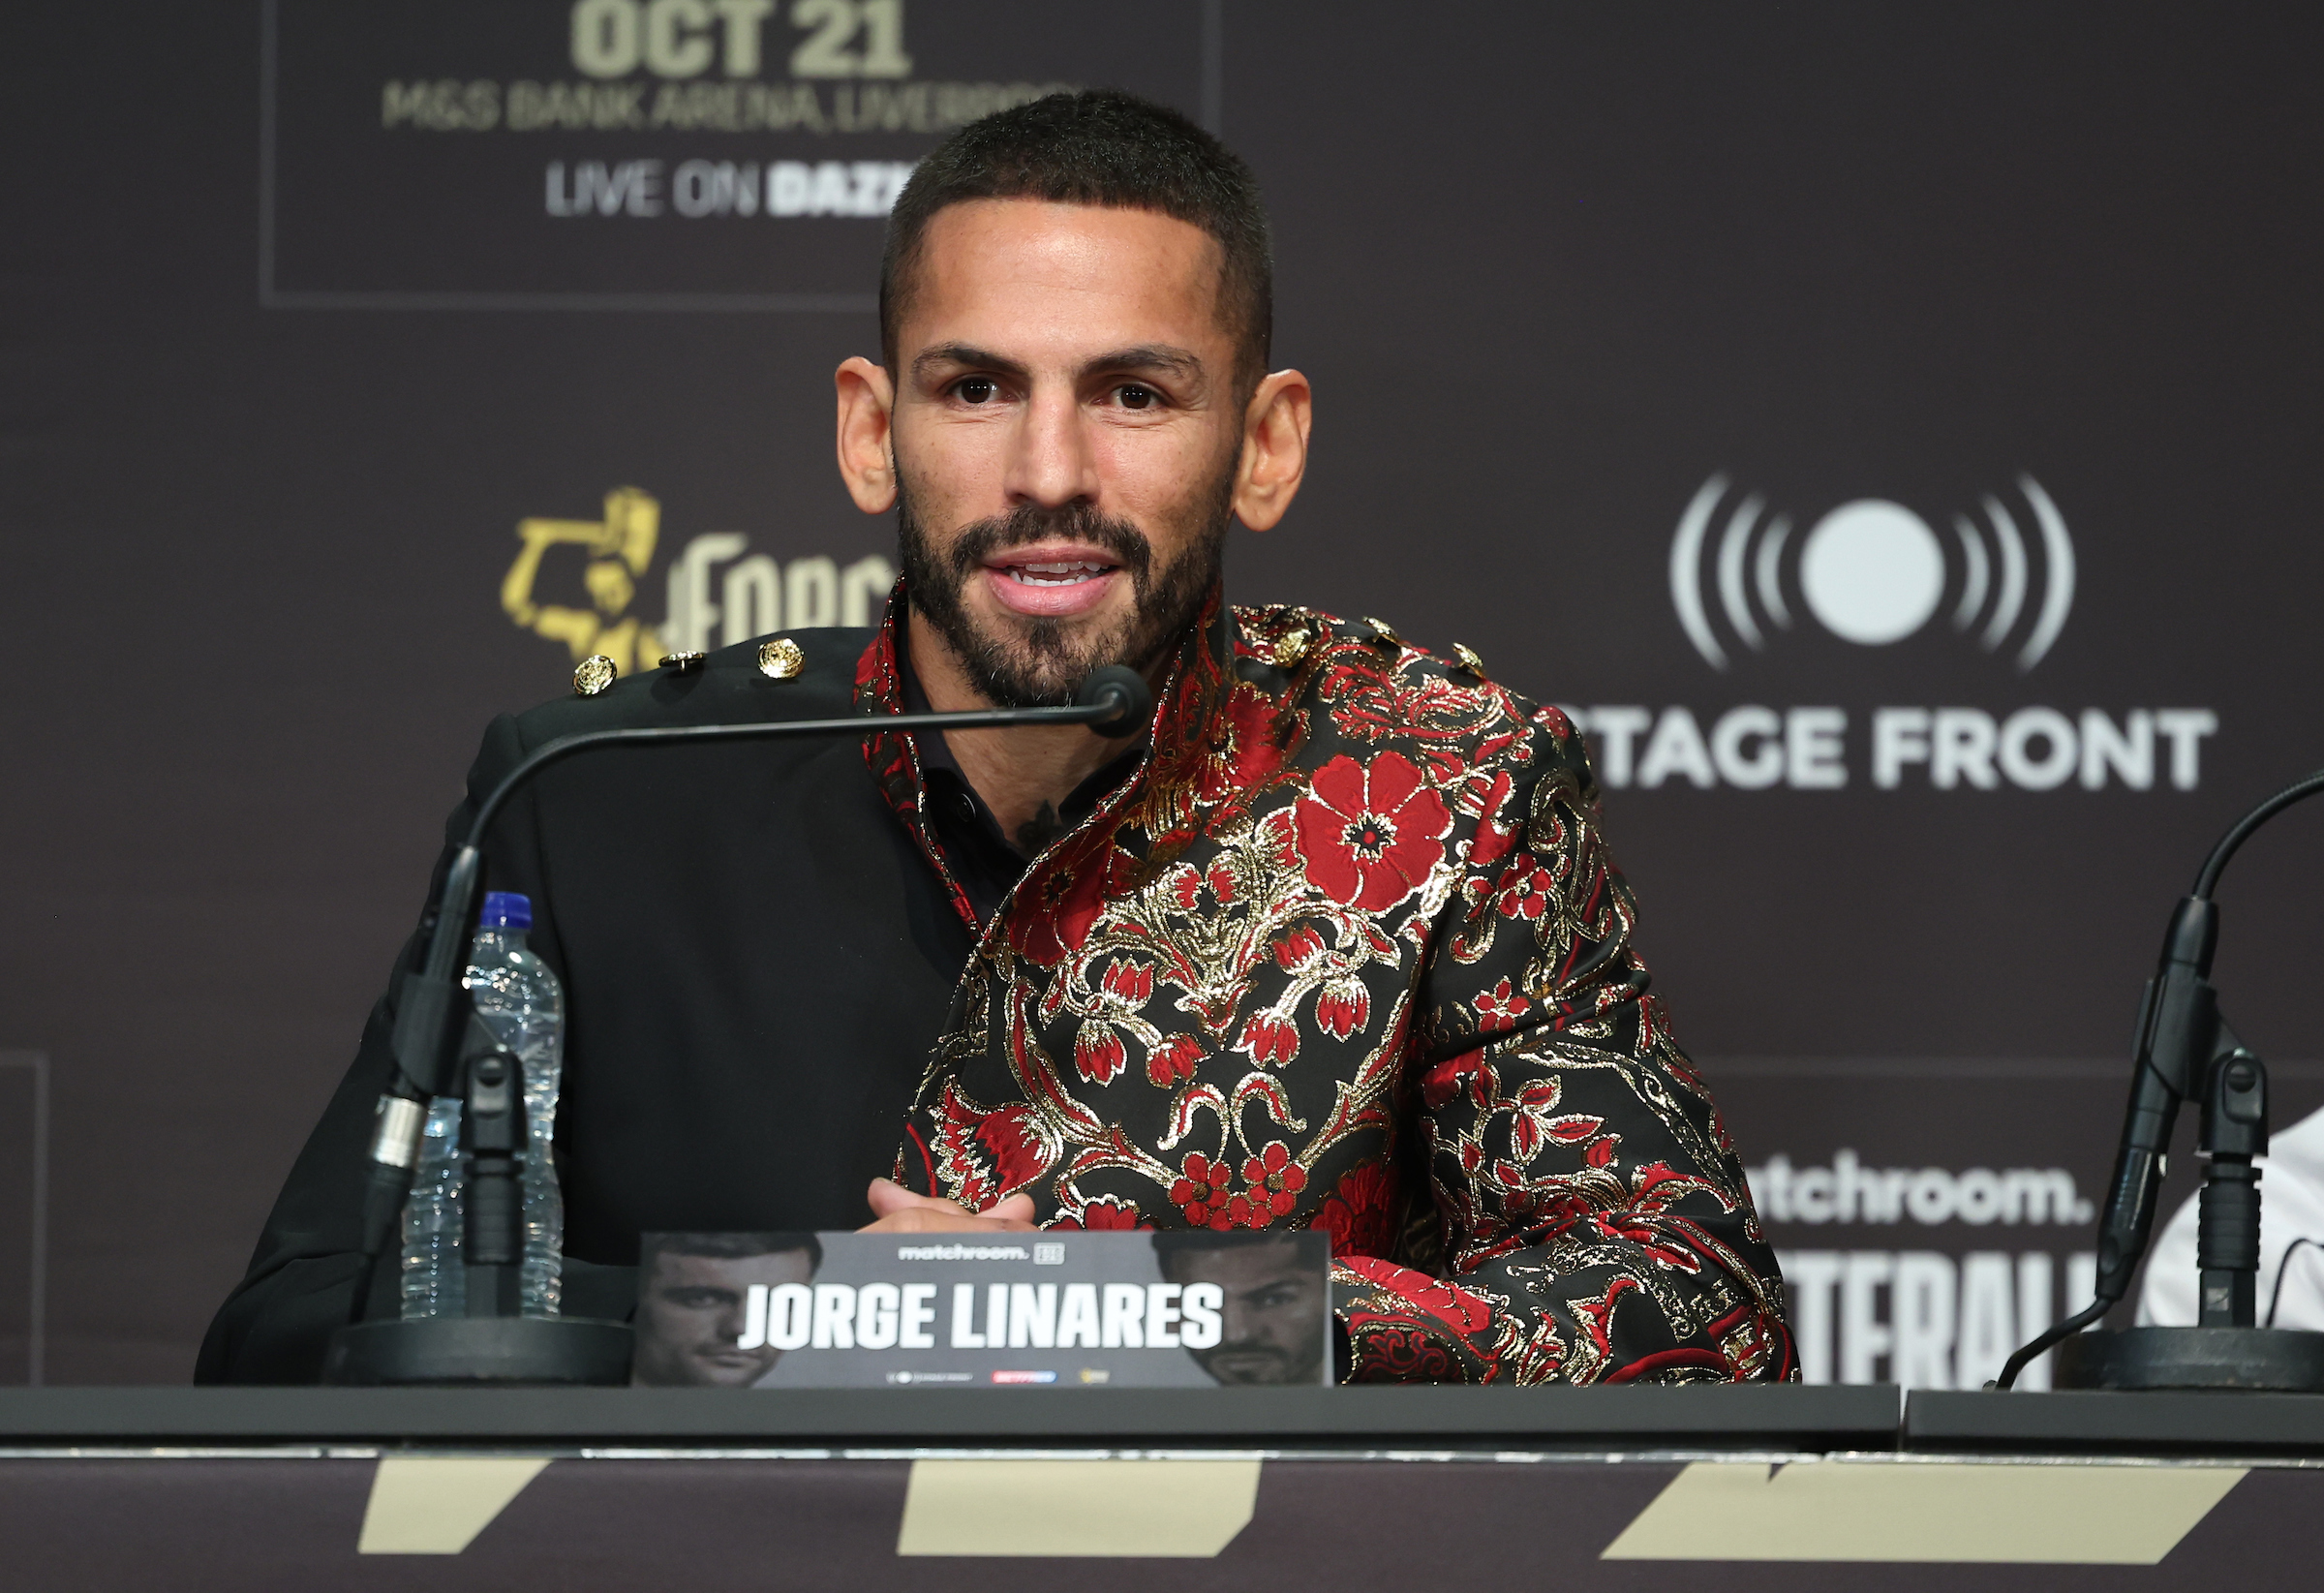 Jorge Linares announces retirement following defeat to Catterall